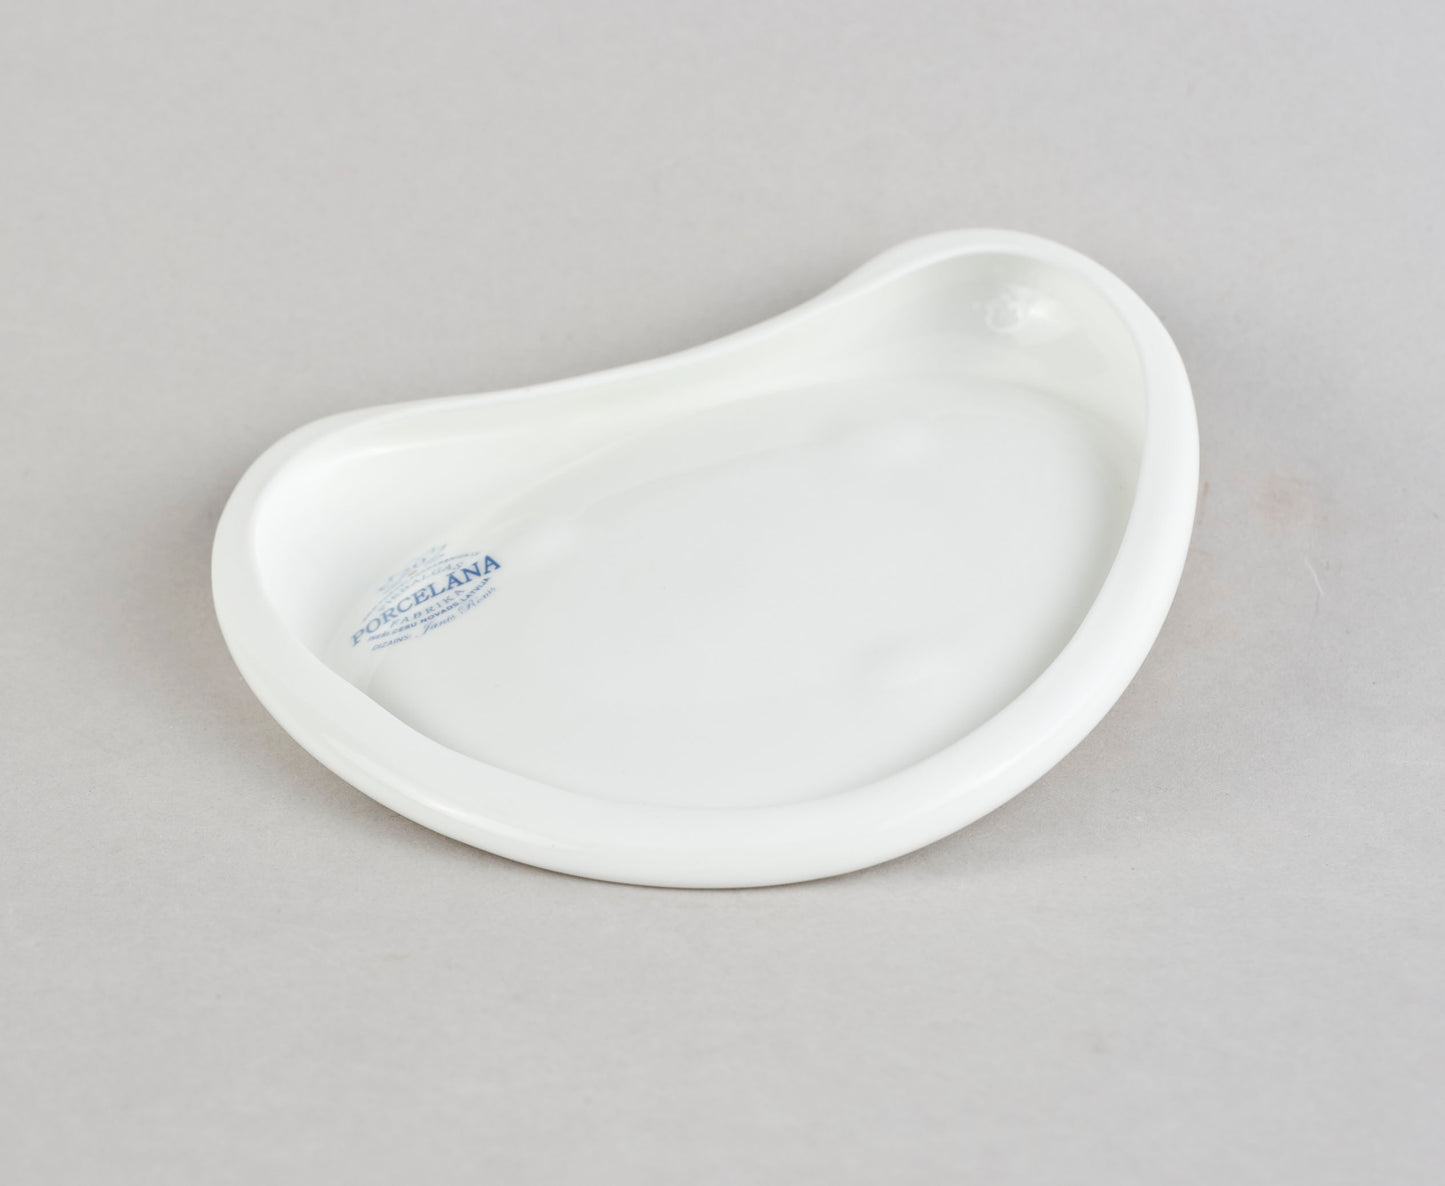 Porcelain Thermo Plate (mug not included)